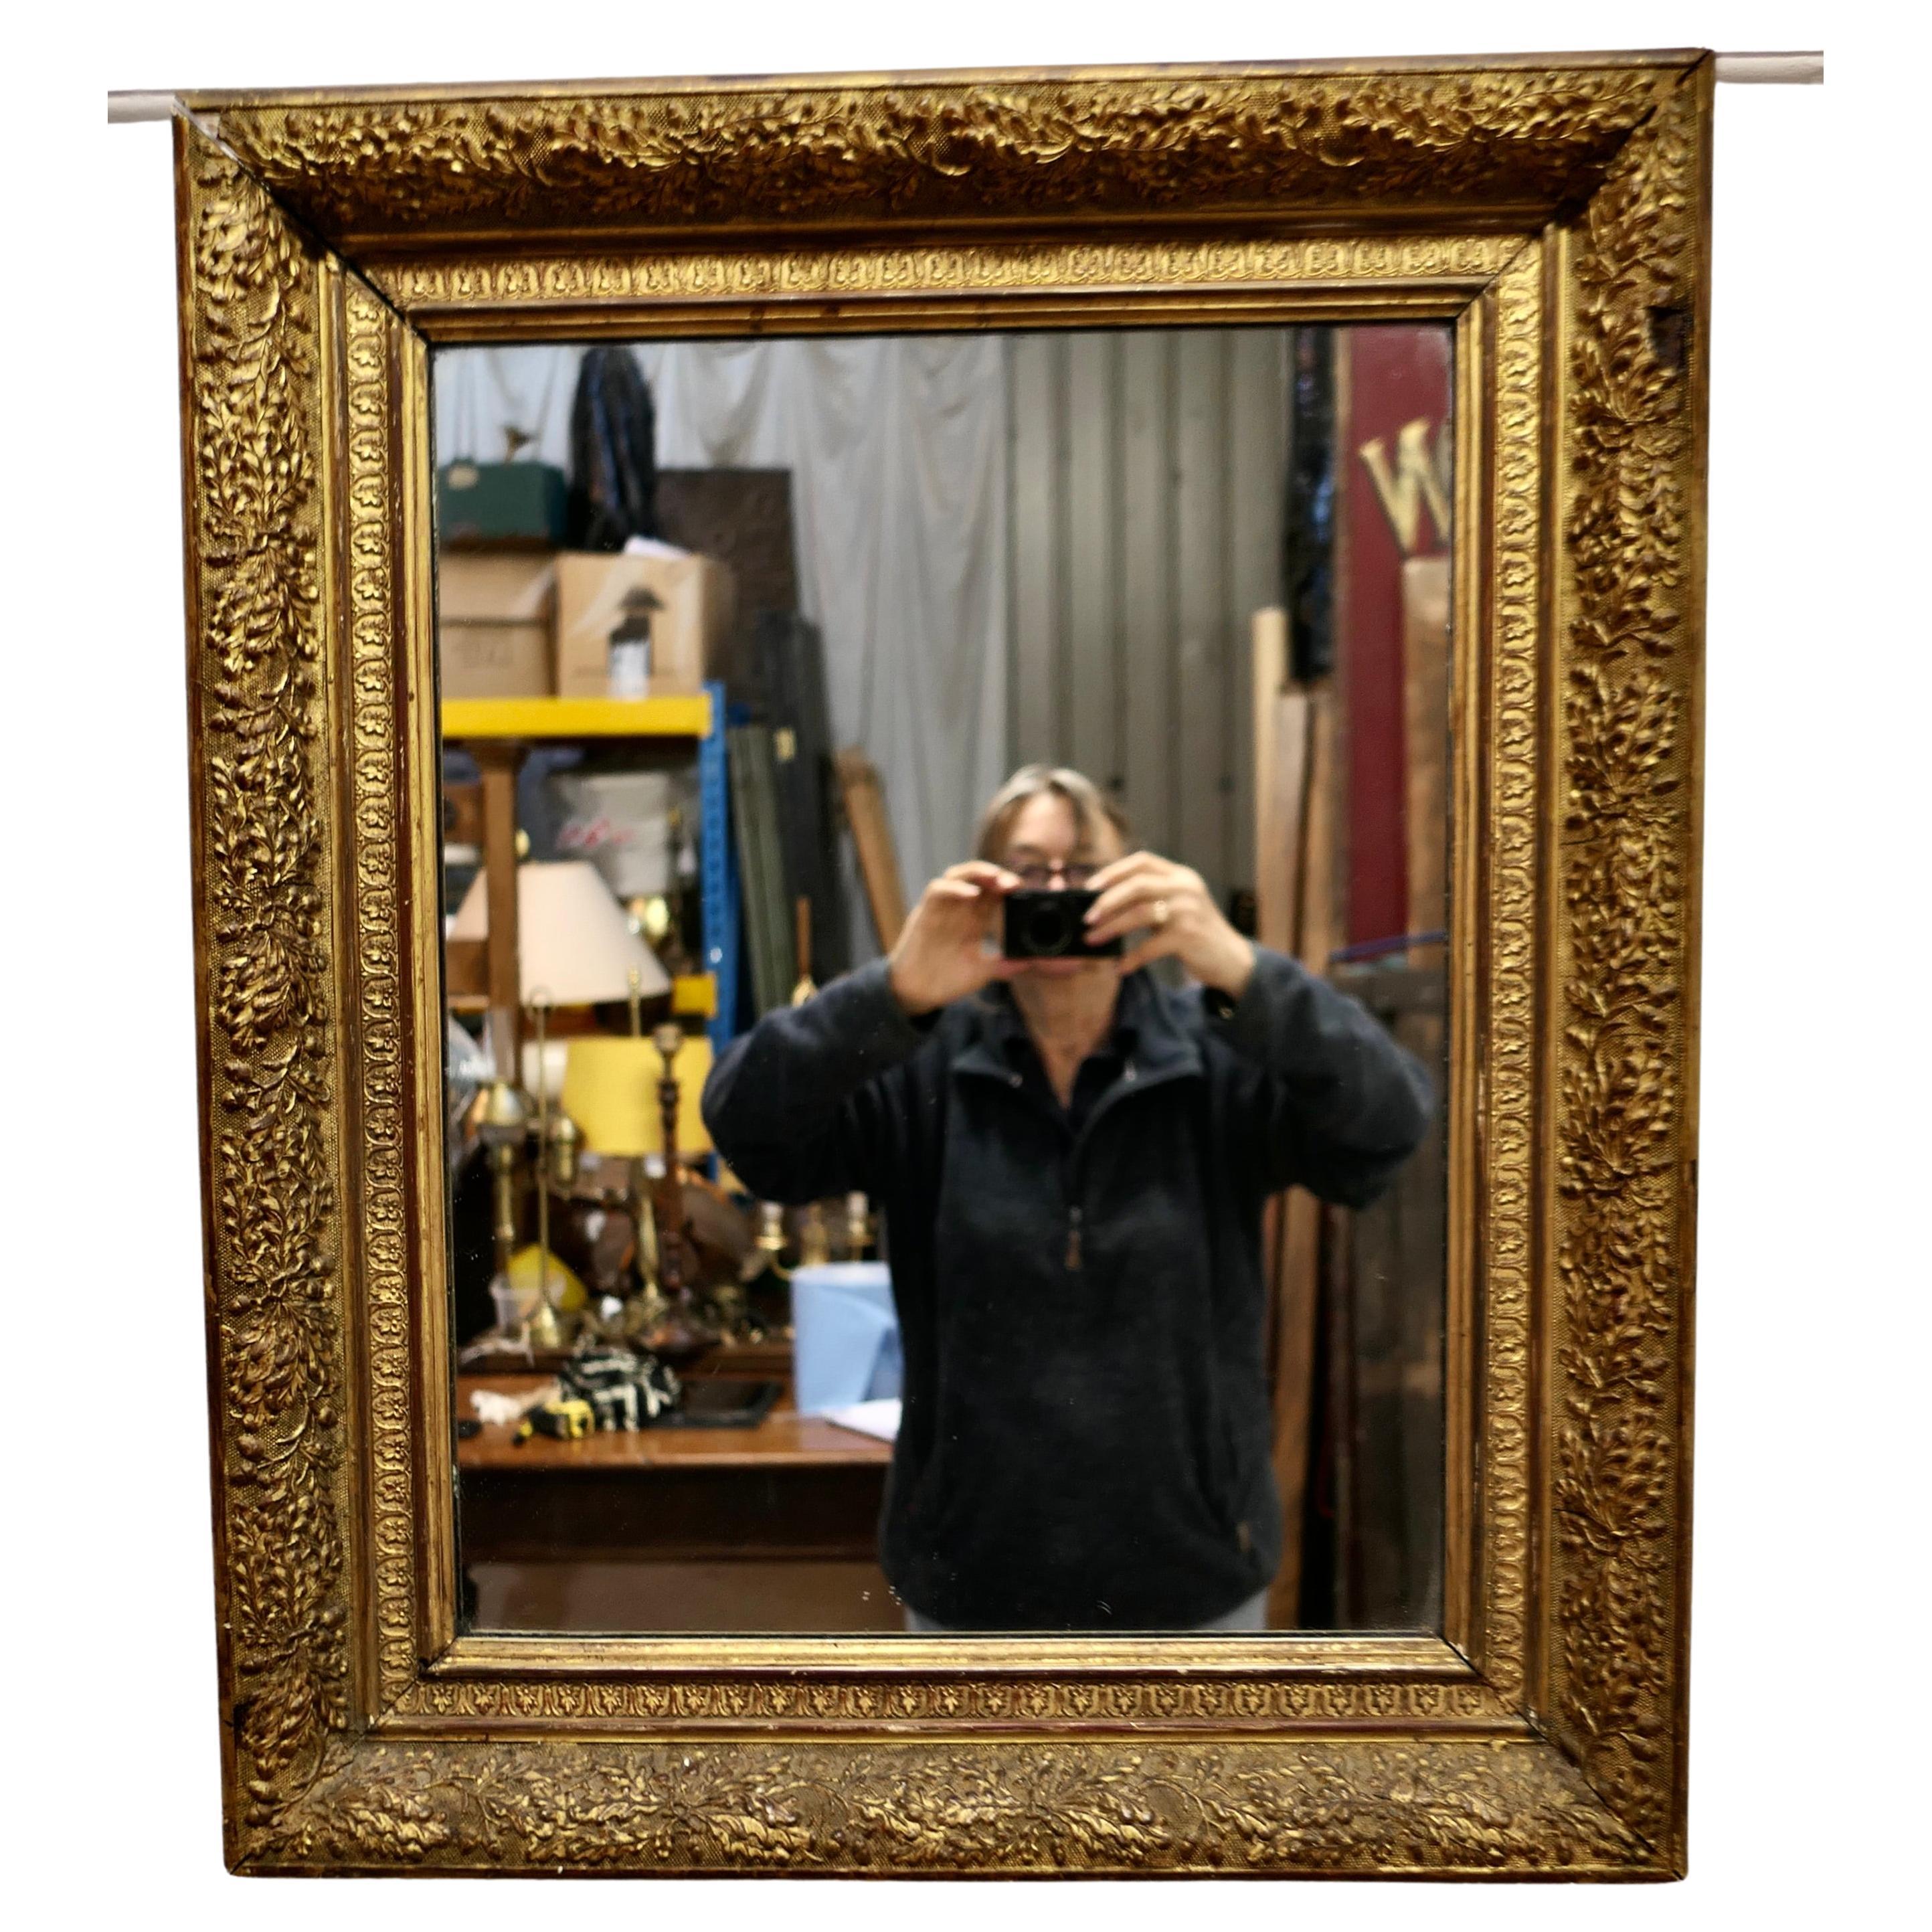 An Elegant 19th Century Gilt Wall Mirror

This is a lovely old mirror it is set in a Deeply Moulded Decorative Gilt 4” wide Frame, 
The looking Glass is in good condition, the frame is very attractive with deep moulding it has a few minor knocks but